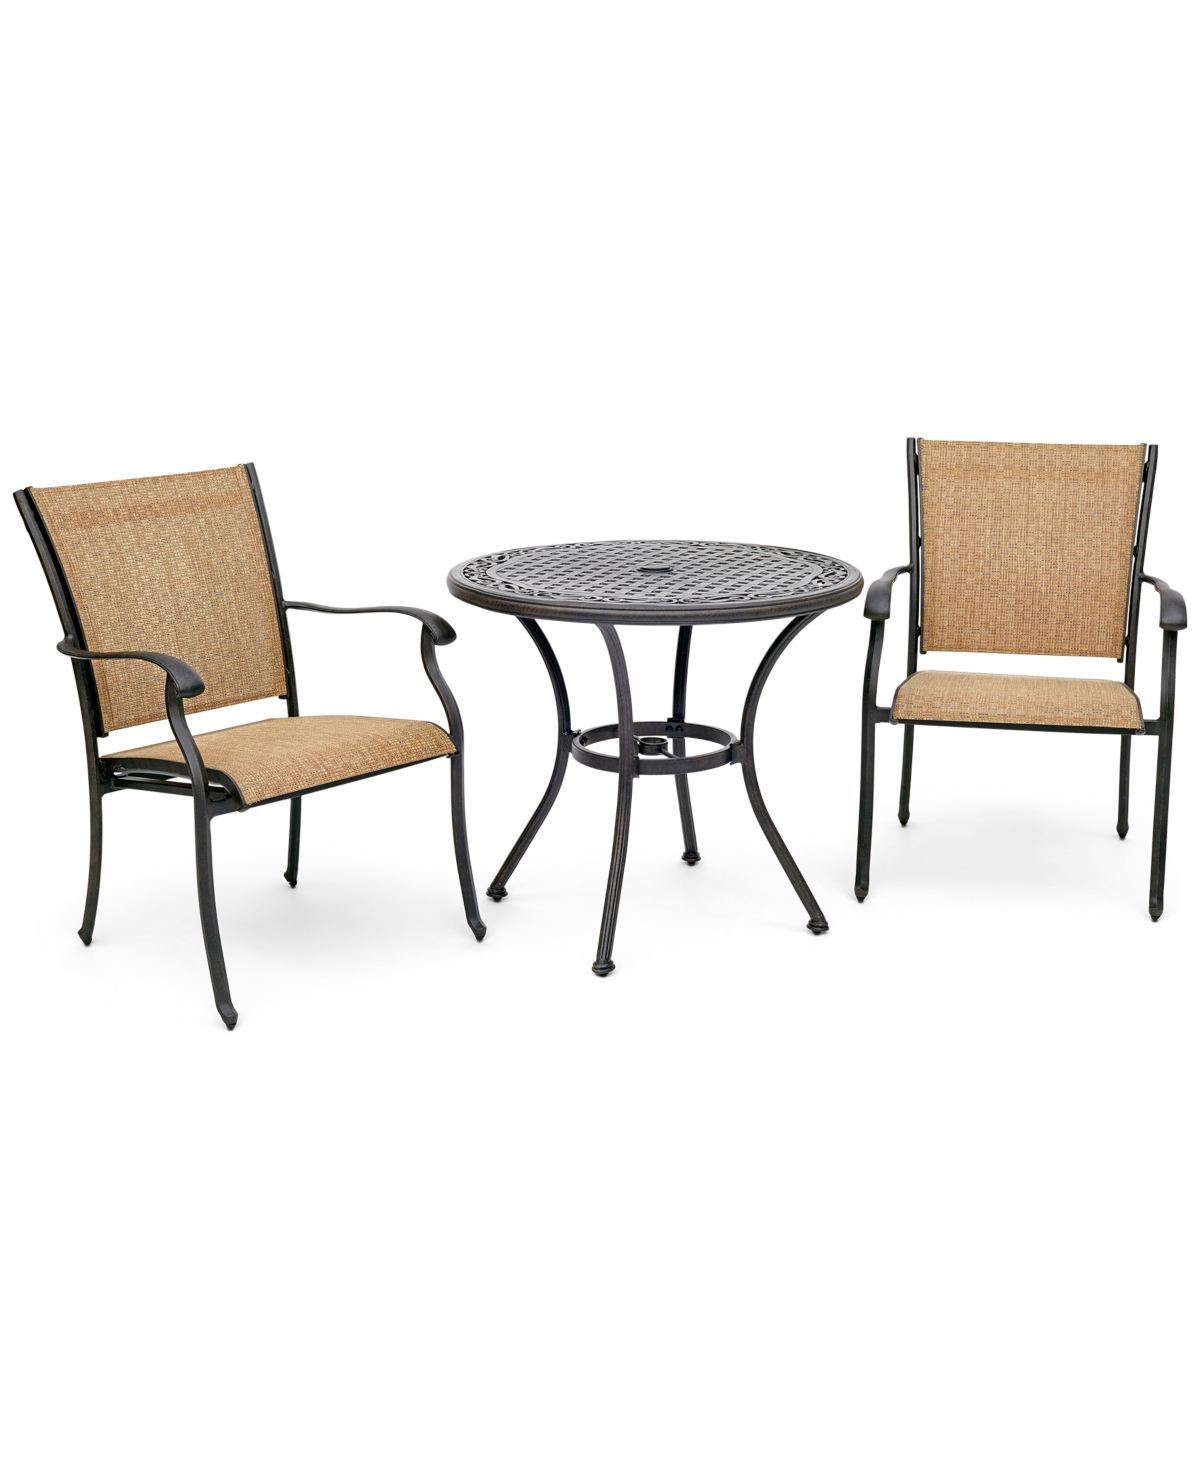 Beachmont Ii Outdoor 3-Pc. Dining Set (32 Round Bistro Table and 2 Dining Chairs), Created for Macys